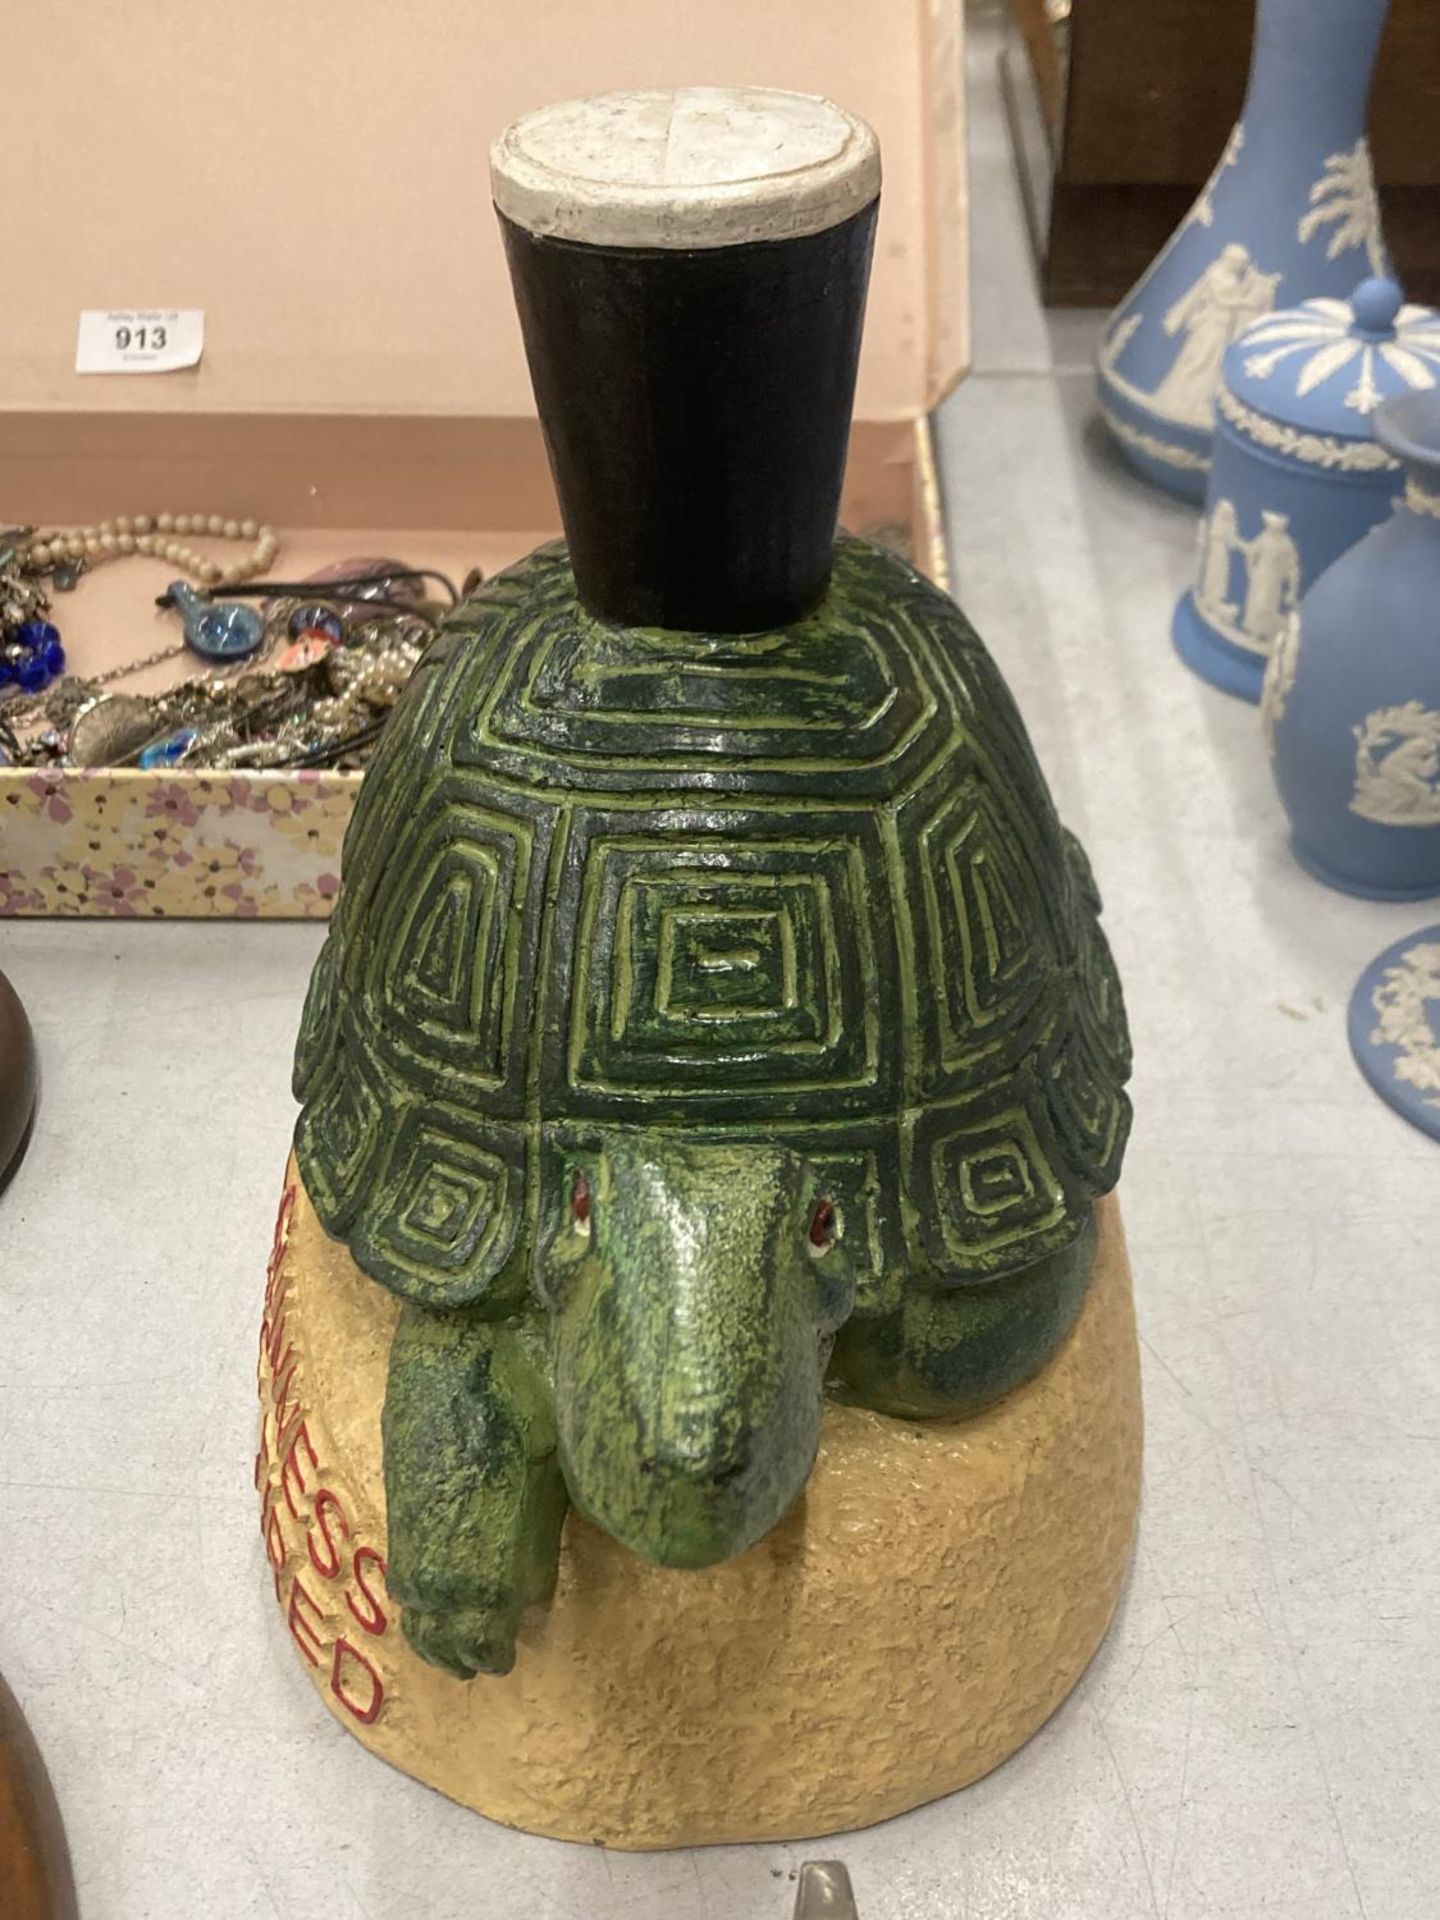 A LARGE GUINNESS RESIN TORTOISE ADVERTISING FIGURE - Image 2 of 3